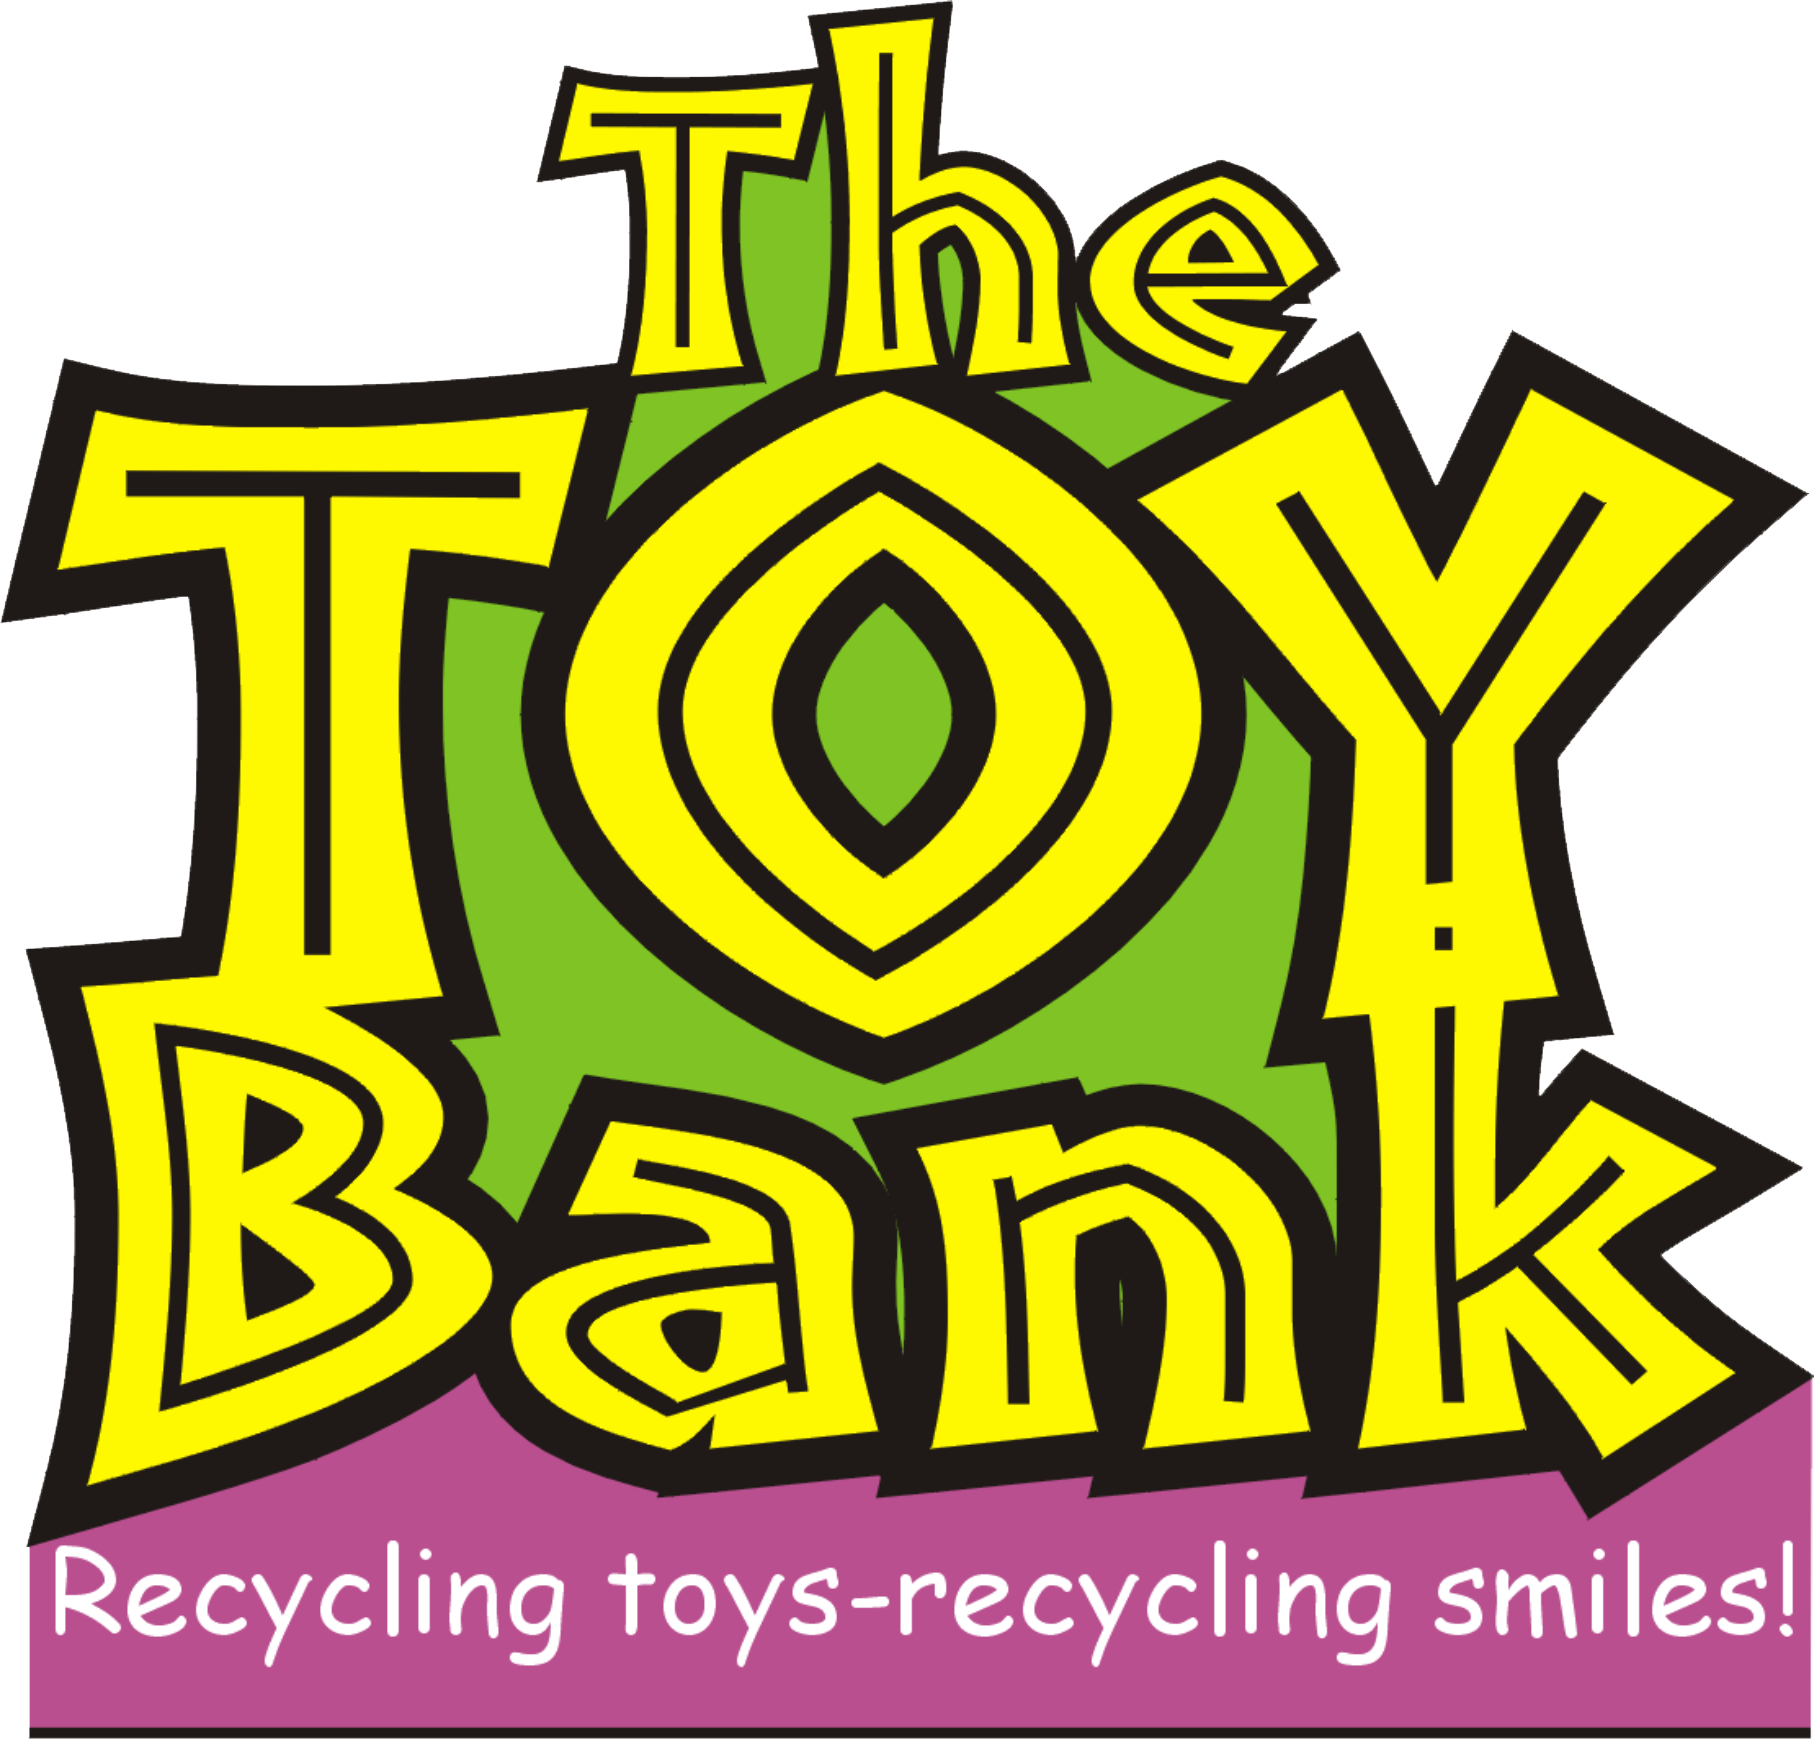 The Toy Bank  